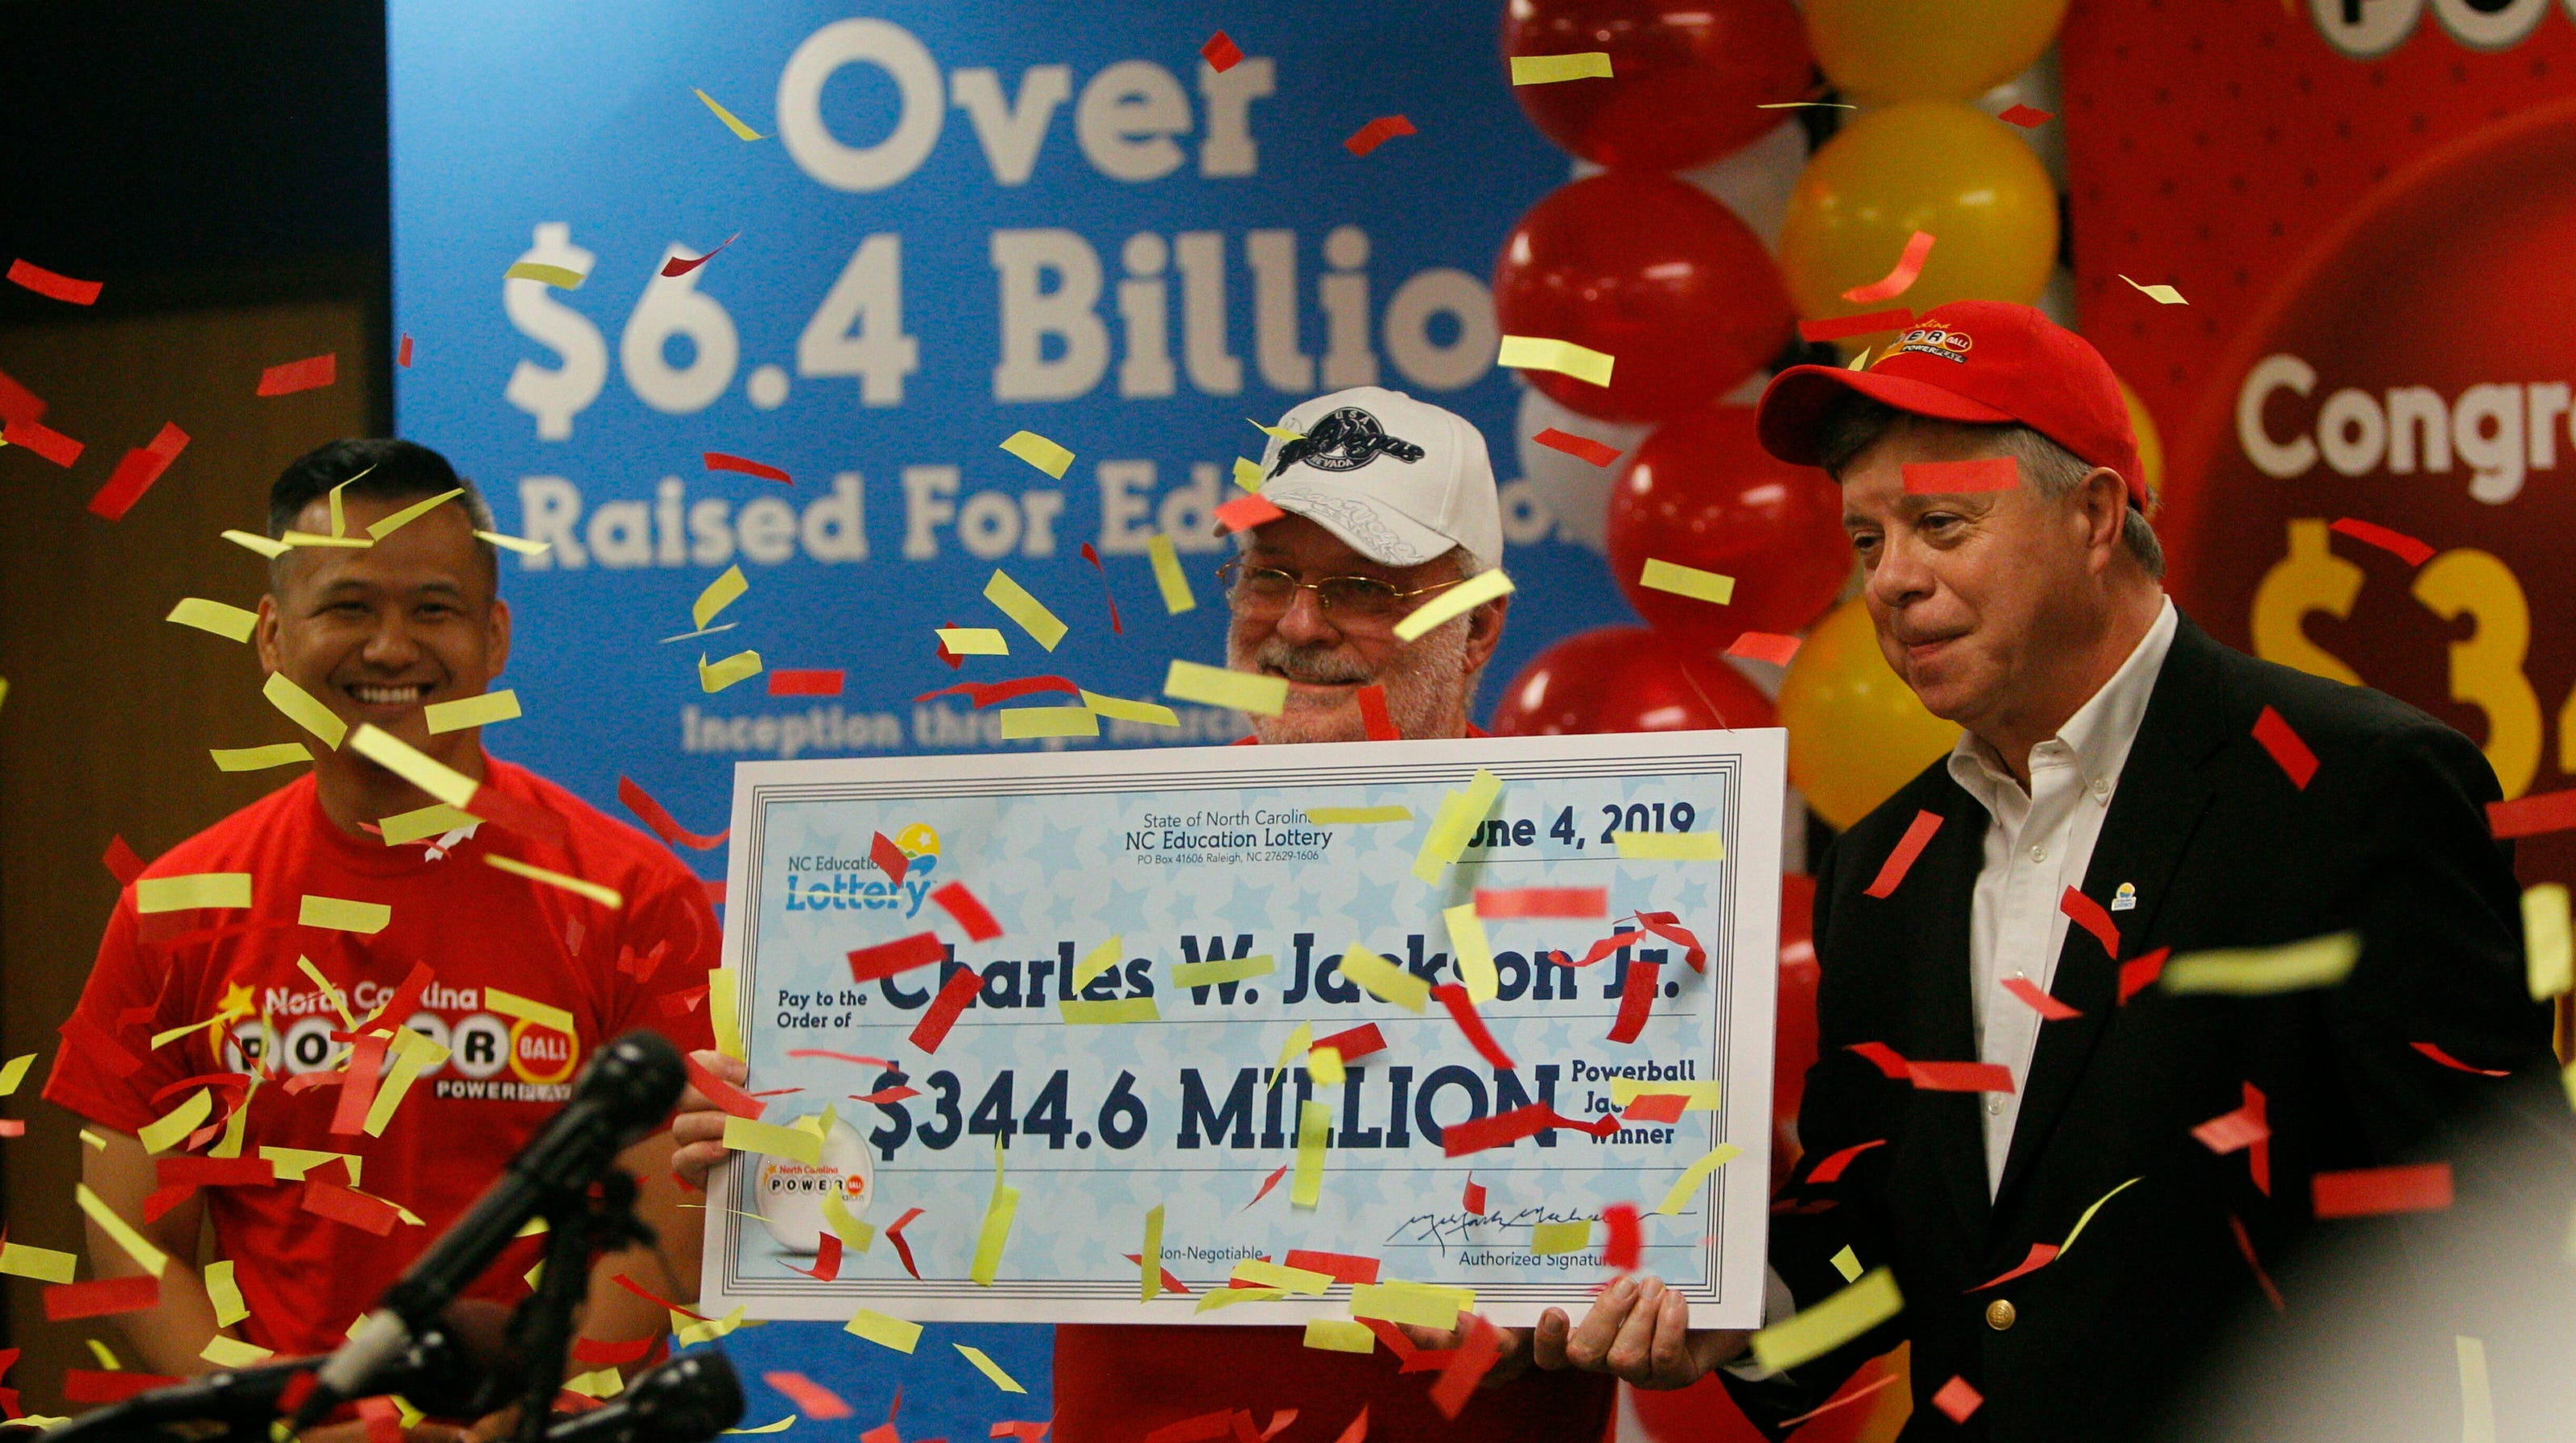 north-carolina-powerball-winner-finds-good-fortune-with-344-6m-win